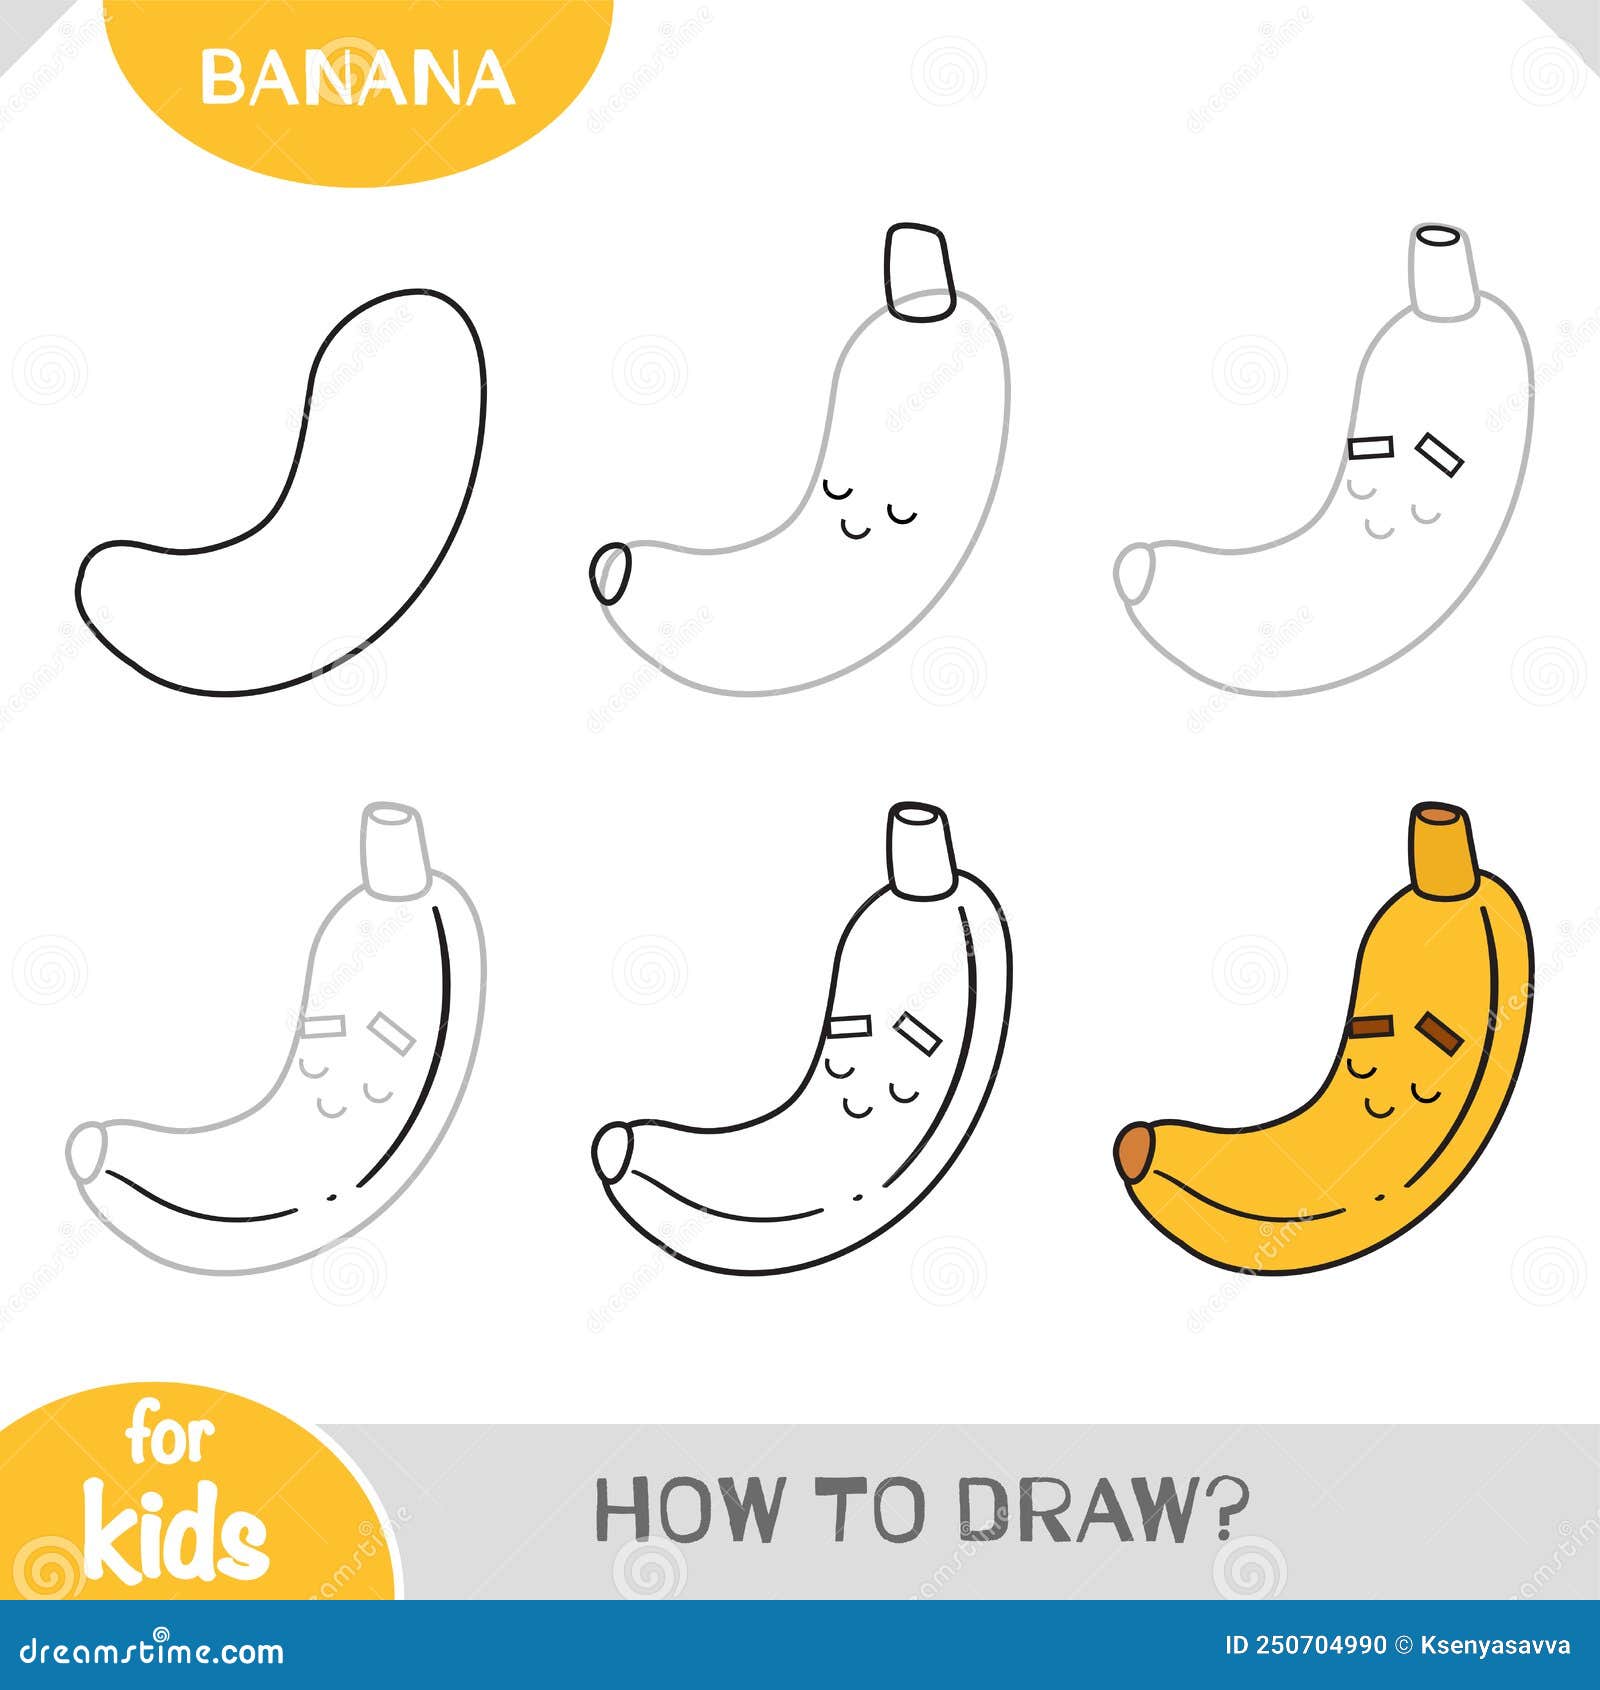 How To Draw A Banana Step by Step - [6 Easy Phase]